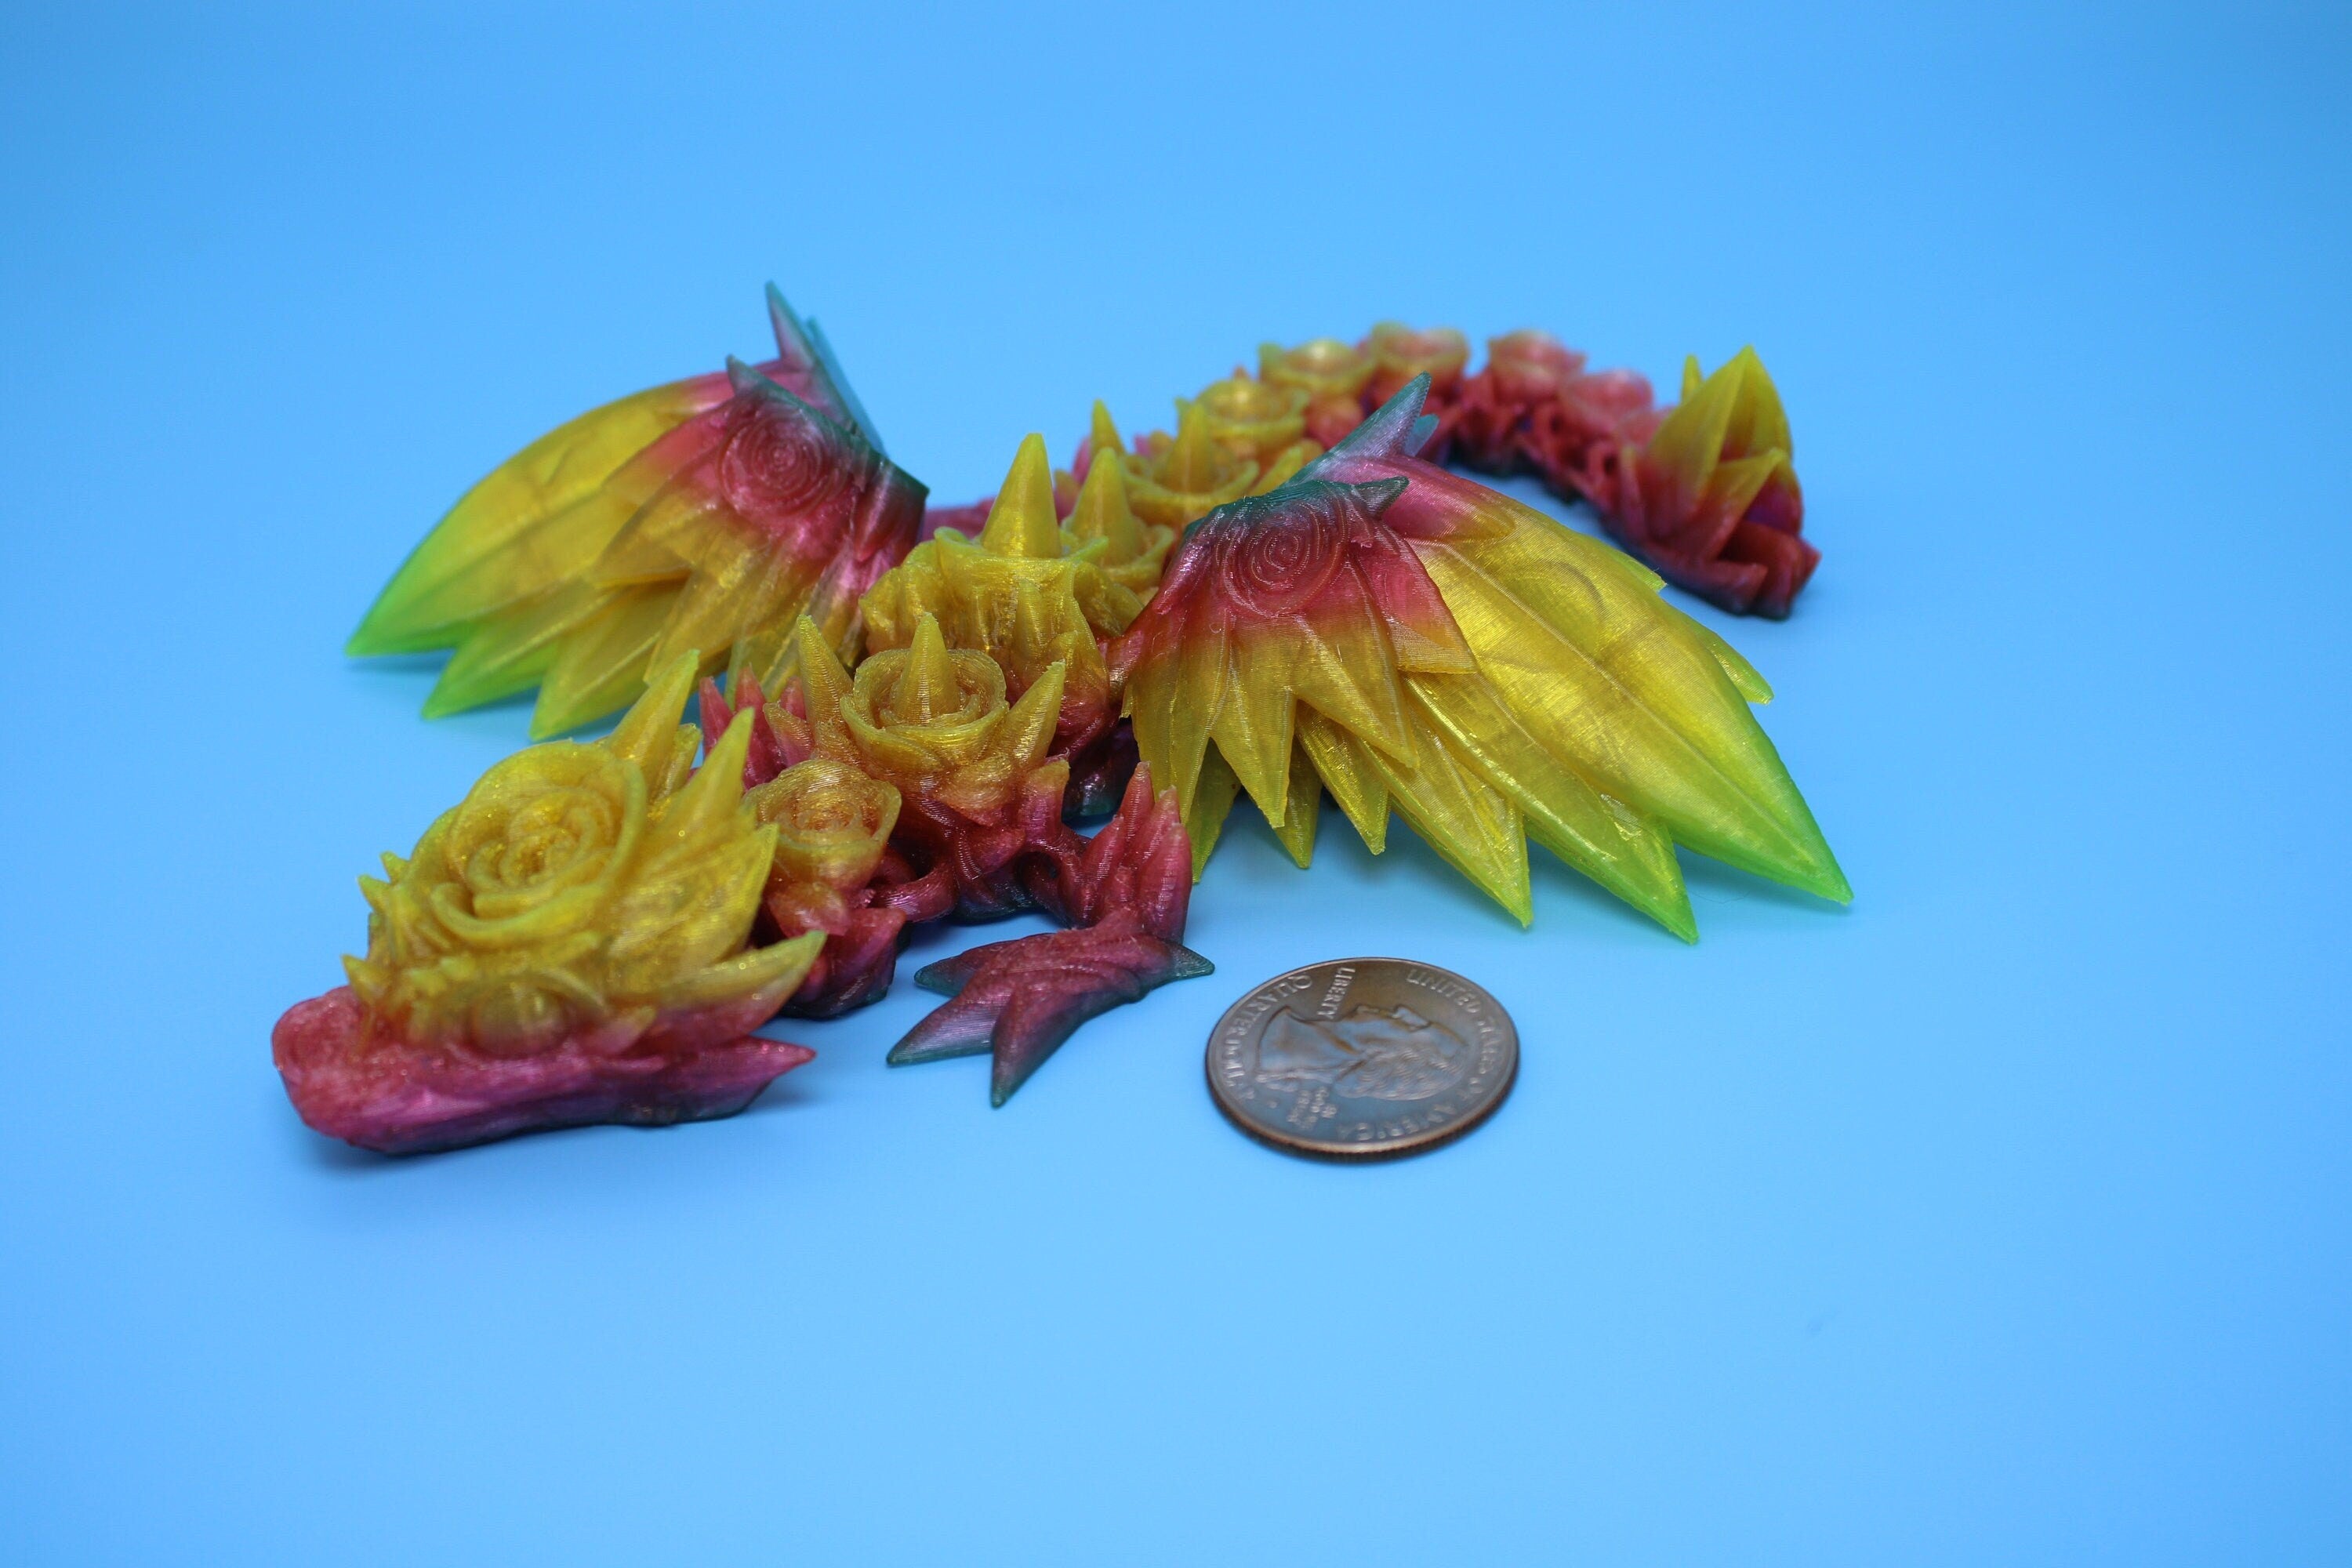 Flexible Miniature Baby Rose Wing Dragon | Rainbow | 3D printed articulating Toy Fidget | Flexi Toy 8.5 in. head to tail | Stress Relief.